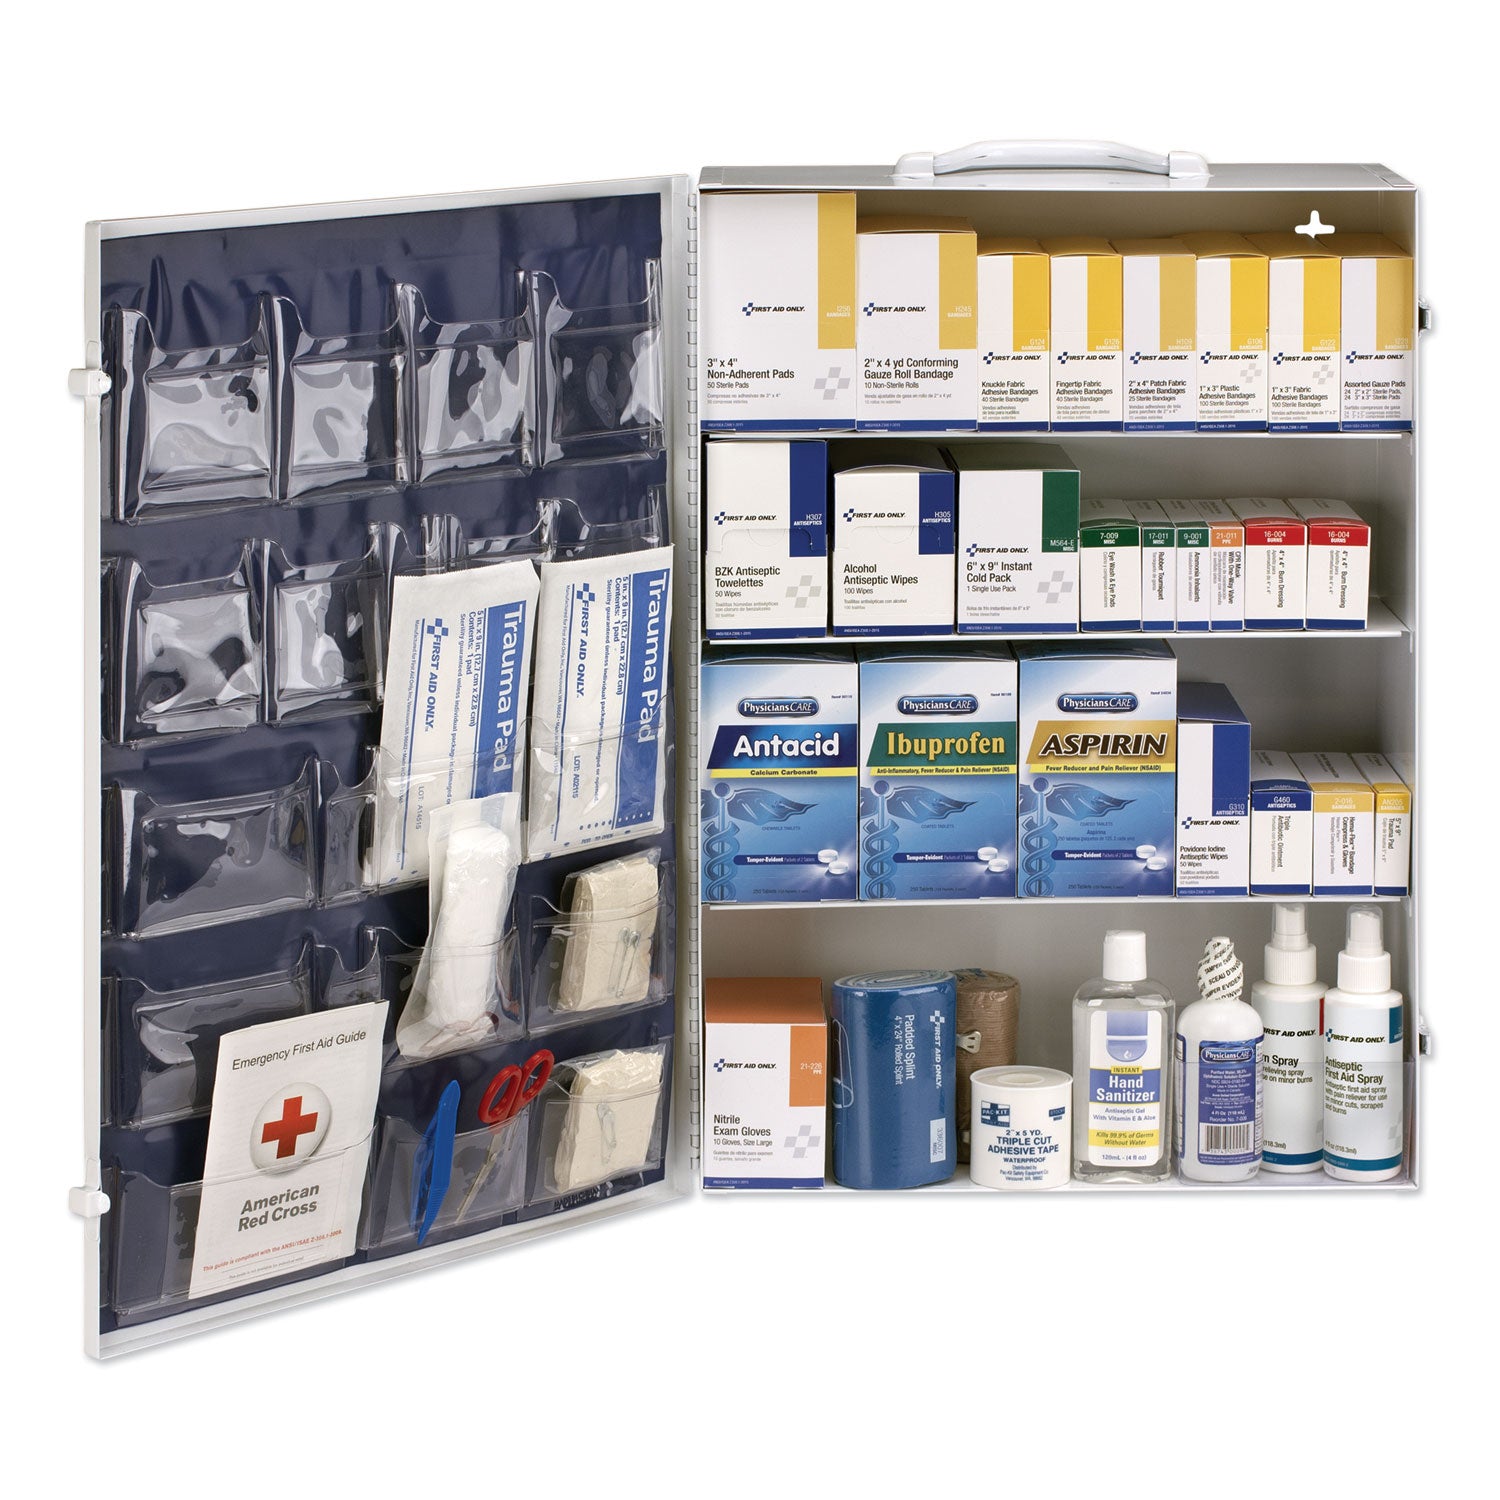 ansi-class-b+-4-shelf-first-aid-station-with-medications-1461-pieces-metal-case_fao90576 - 2